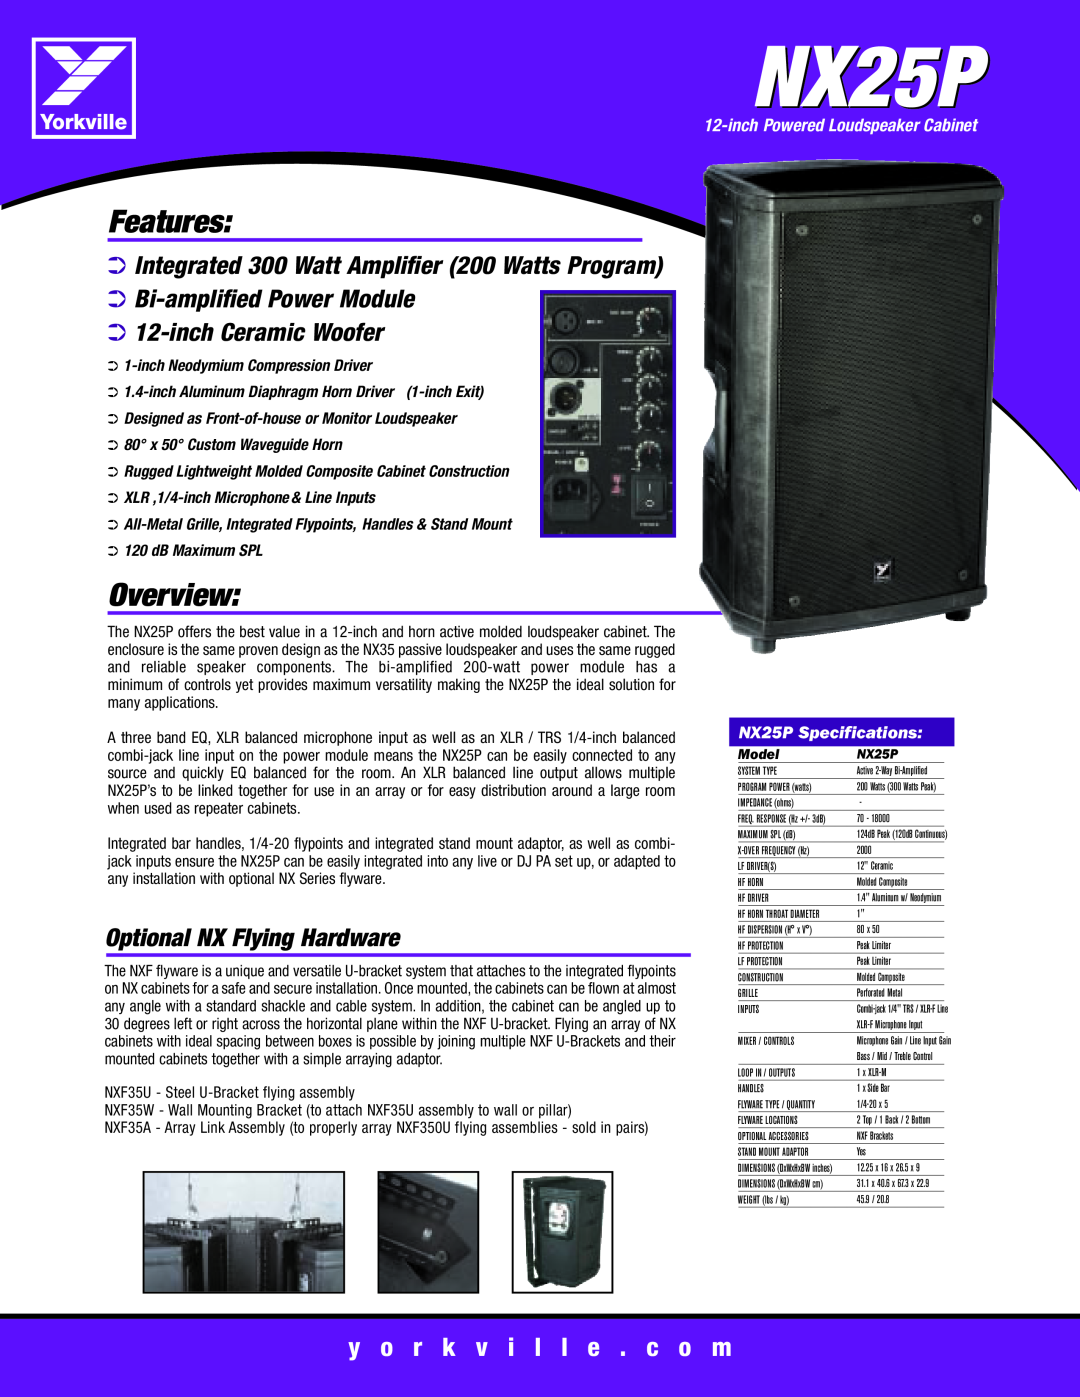 Yorkville Sound nx25P specifications NX25P, Features, Overview, Integrated 300 Watt Amplifier 200 Watts Program, Model 